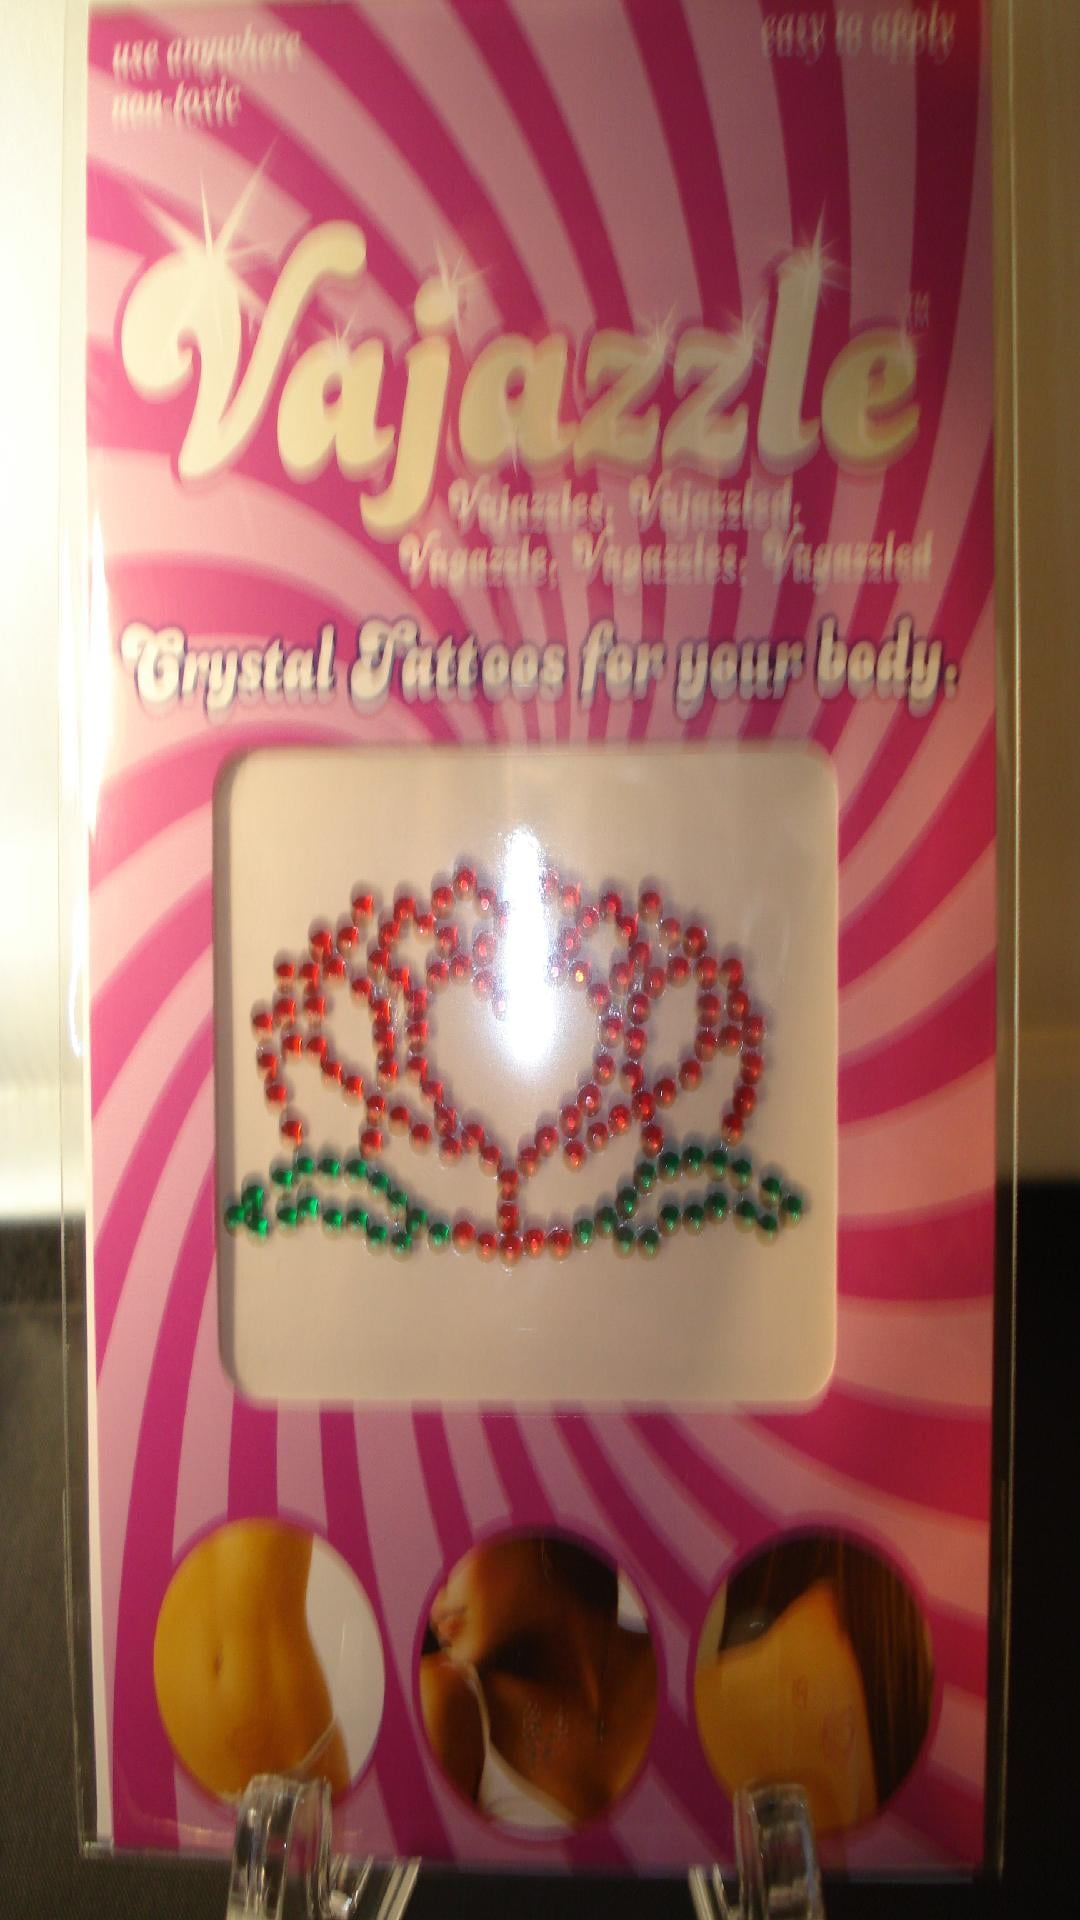 dennis firestone recommends what is vajazzle pictures pic